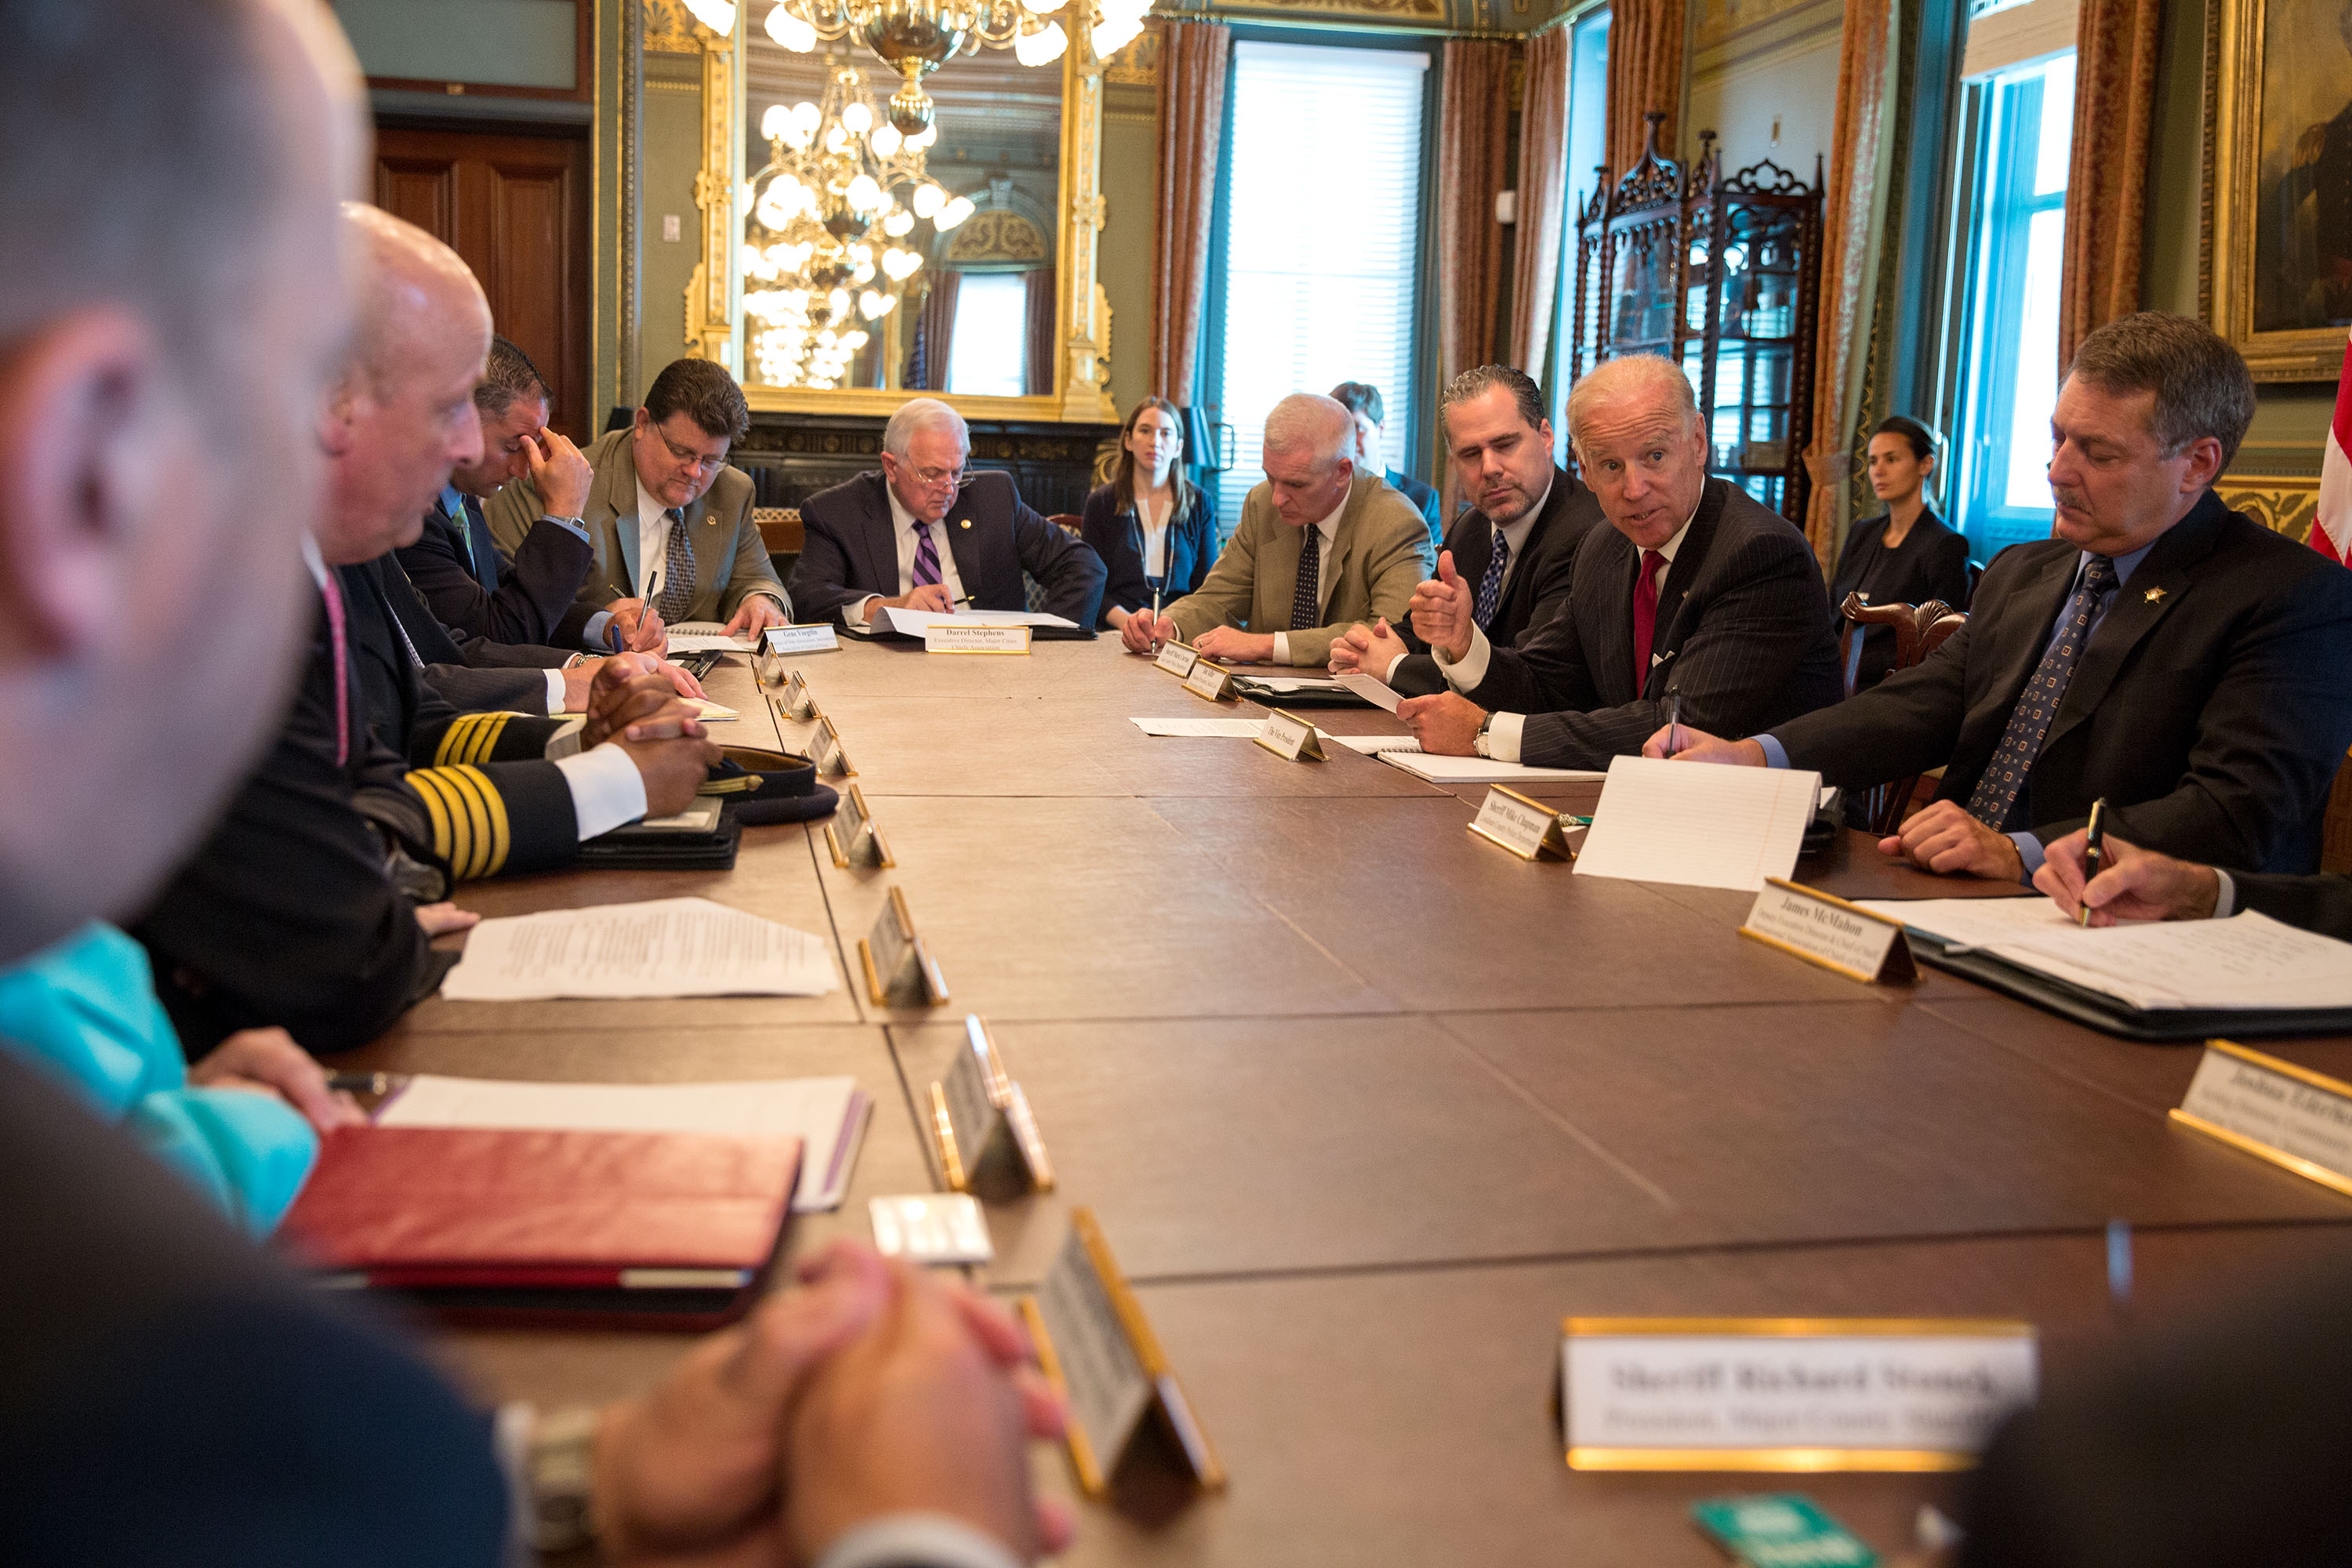 Vice President Biden Meets with Law Enforcement Leaders, Urging Passage of Immigration Reform - whitehouse.gov